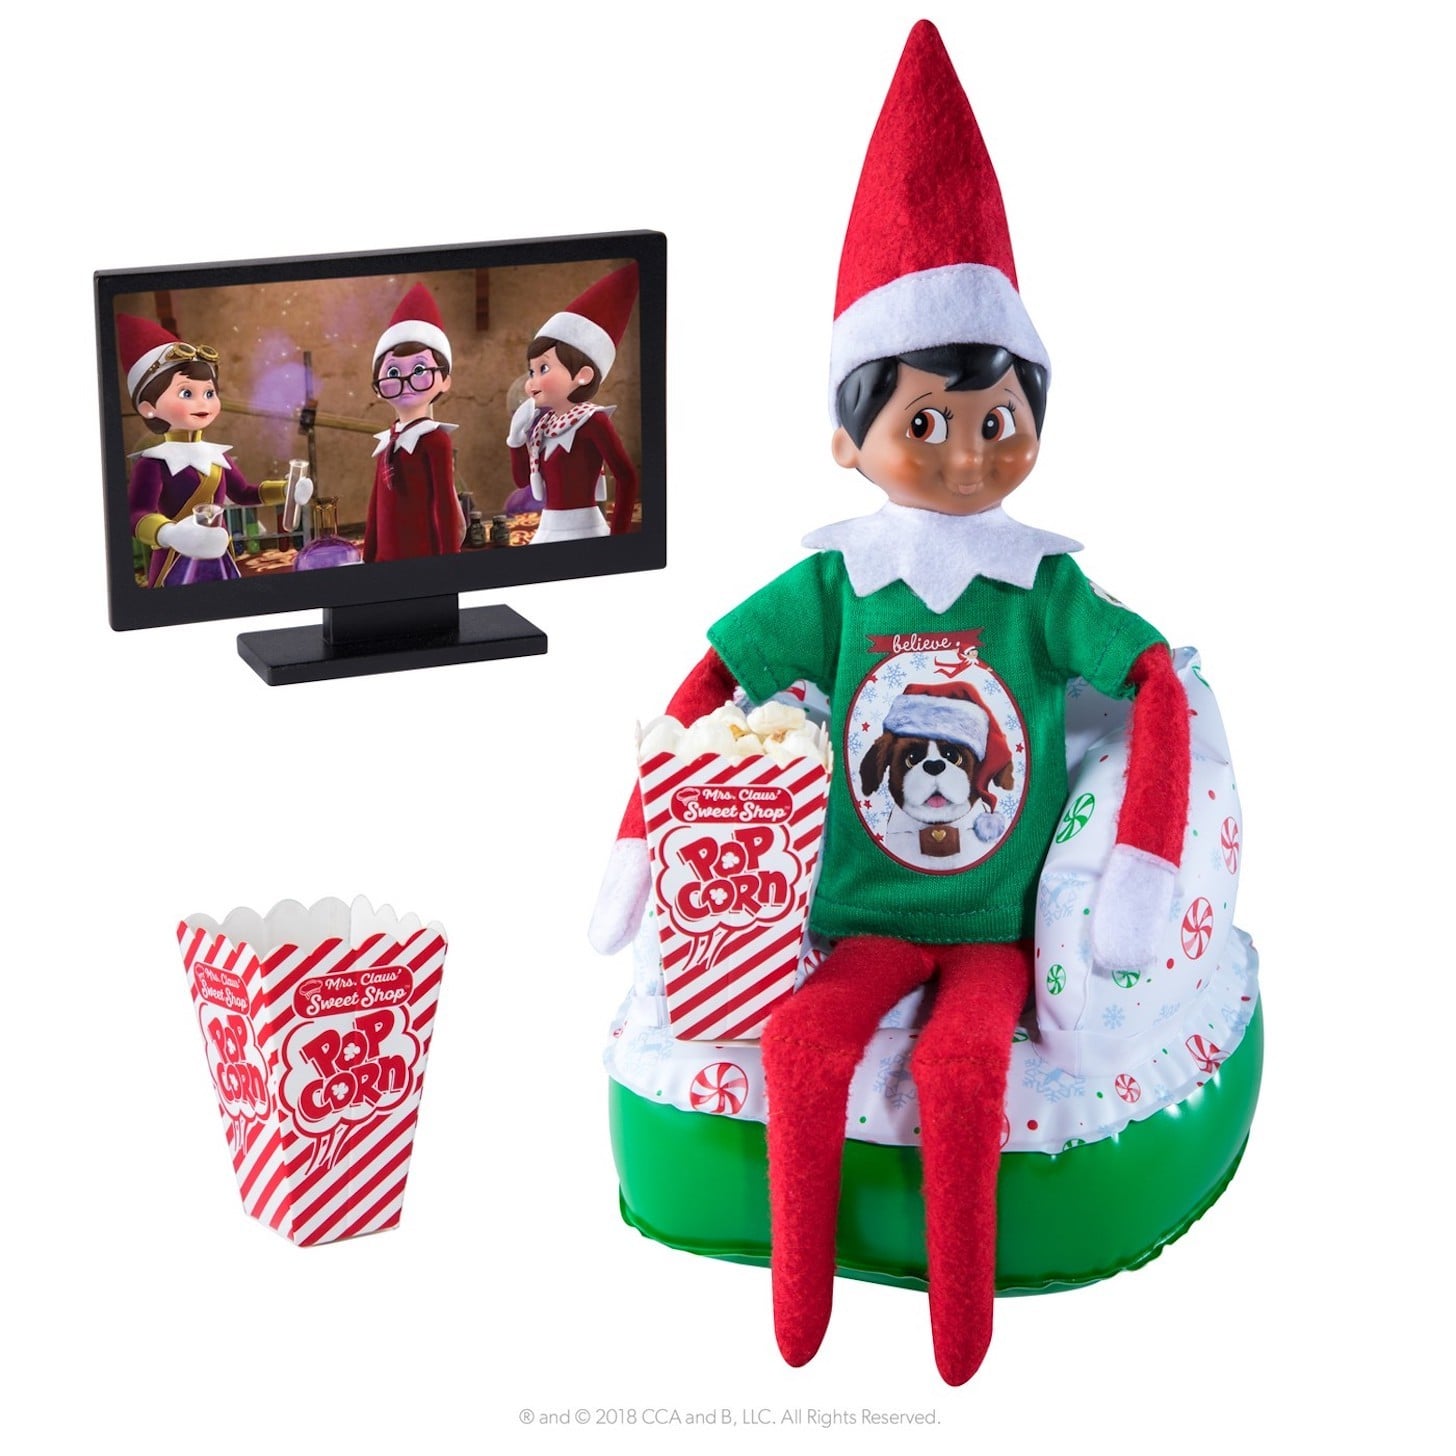 Elf on the Shelf at |